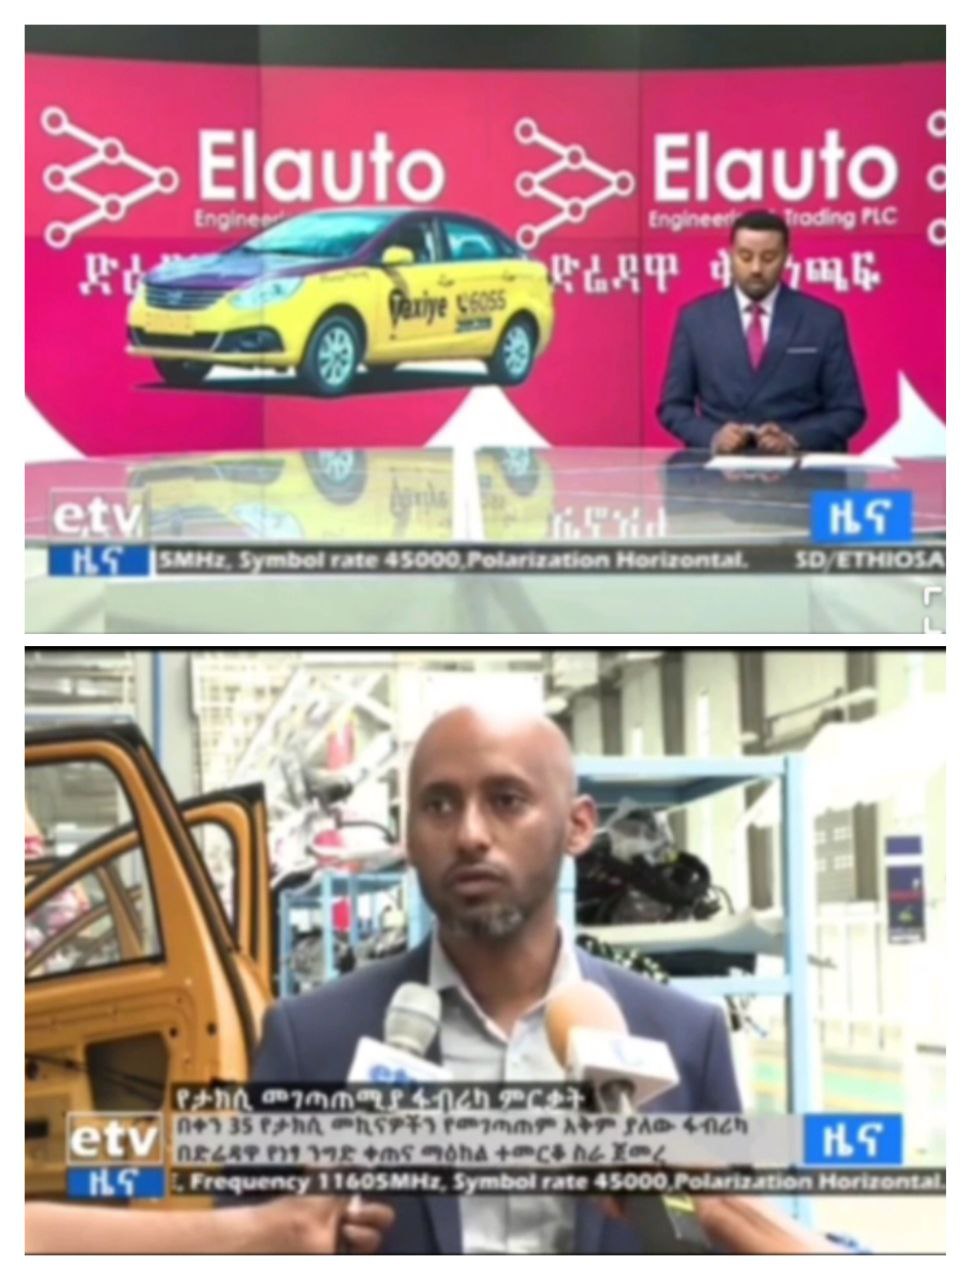 Elauto Engineering Launches an assembling plant in Dire Dawa town.